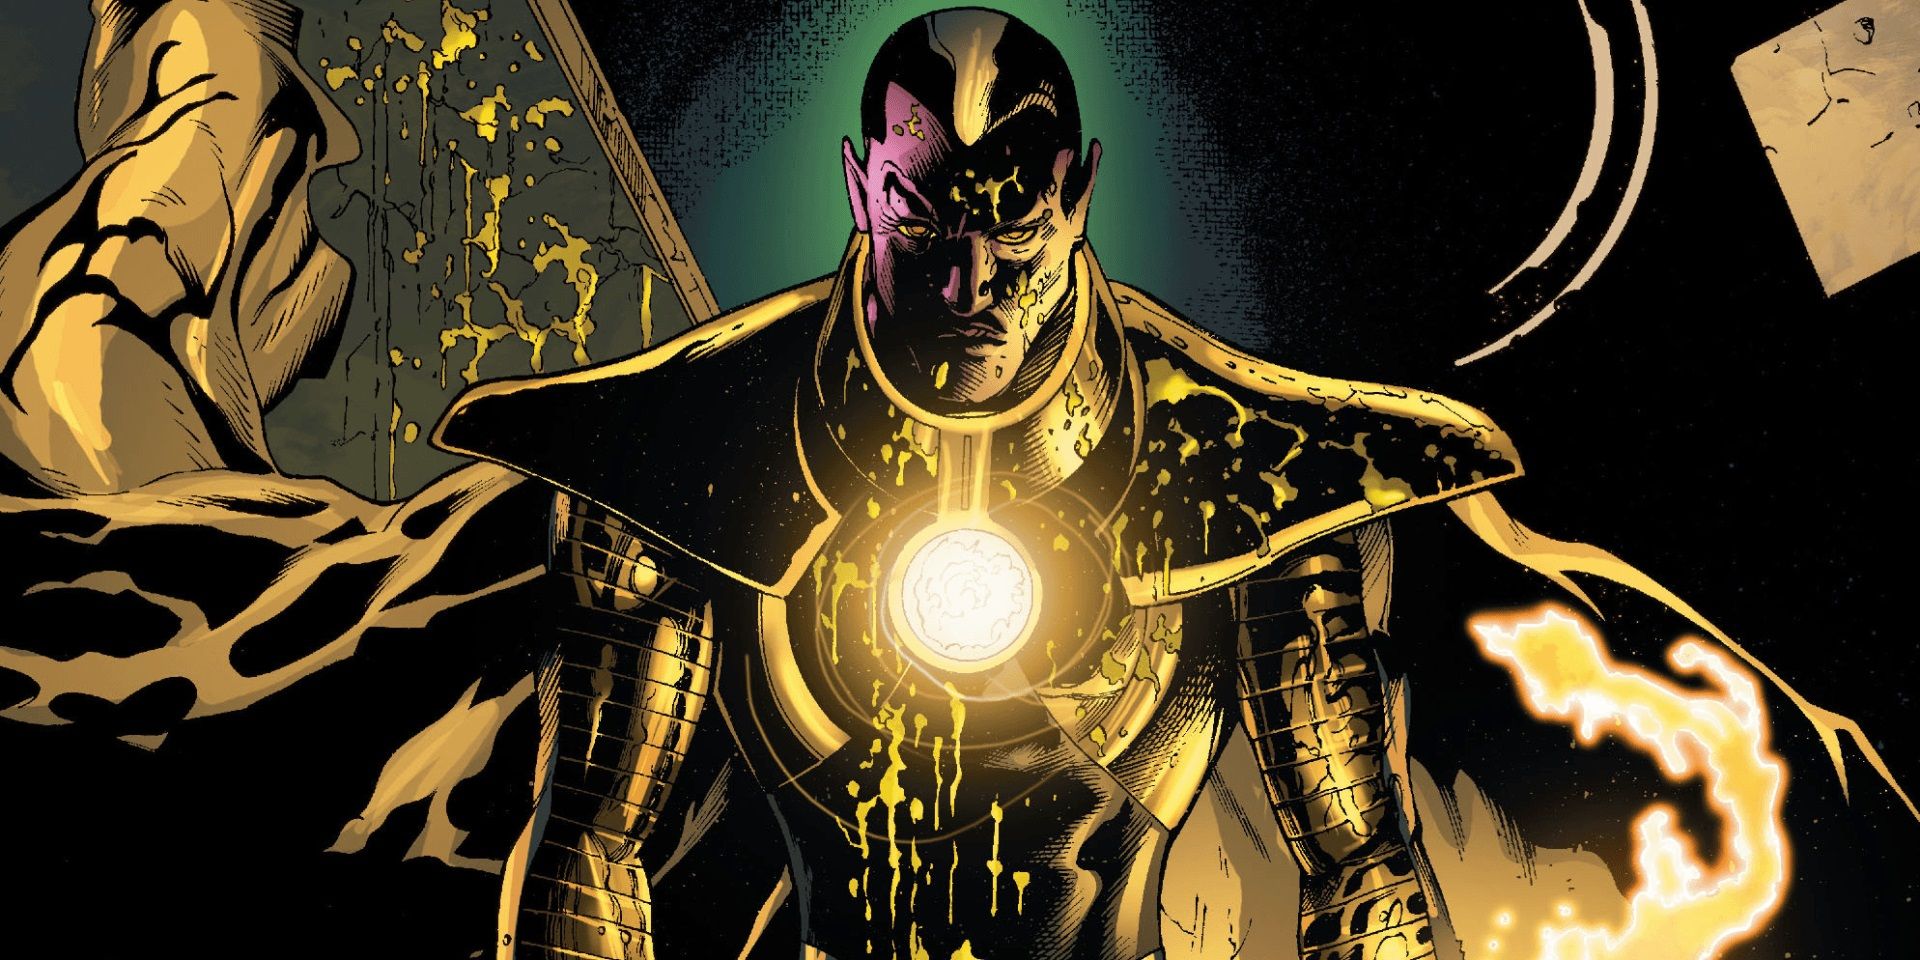 Sinestro as Parallax covered in blood and scowling